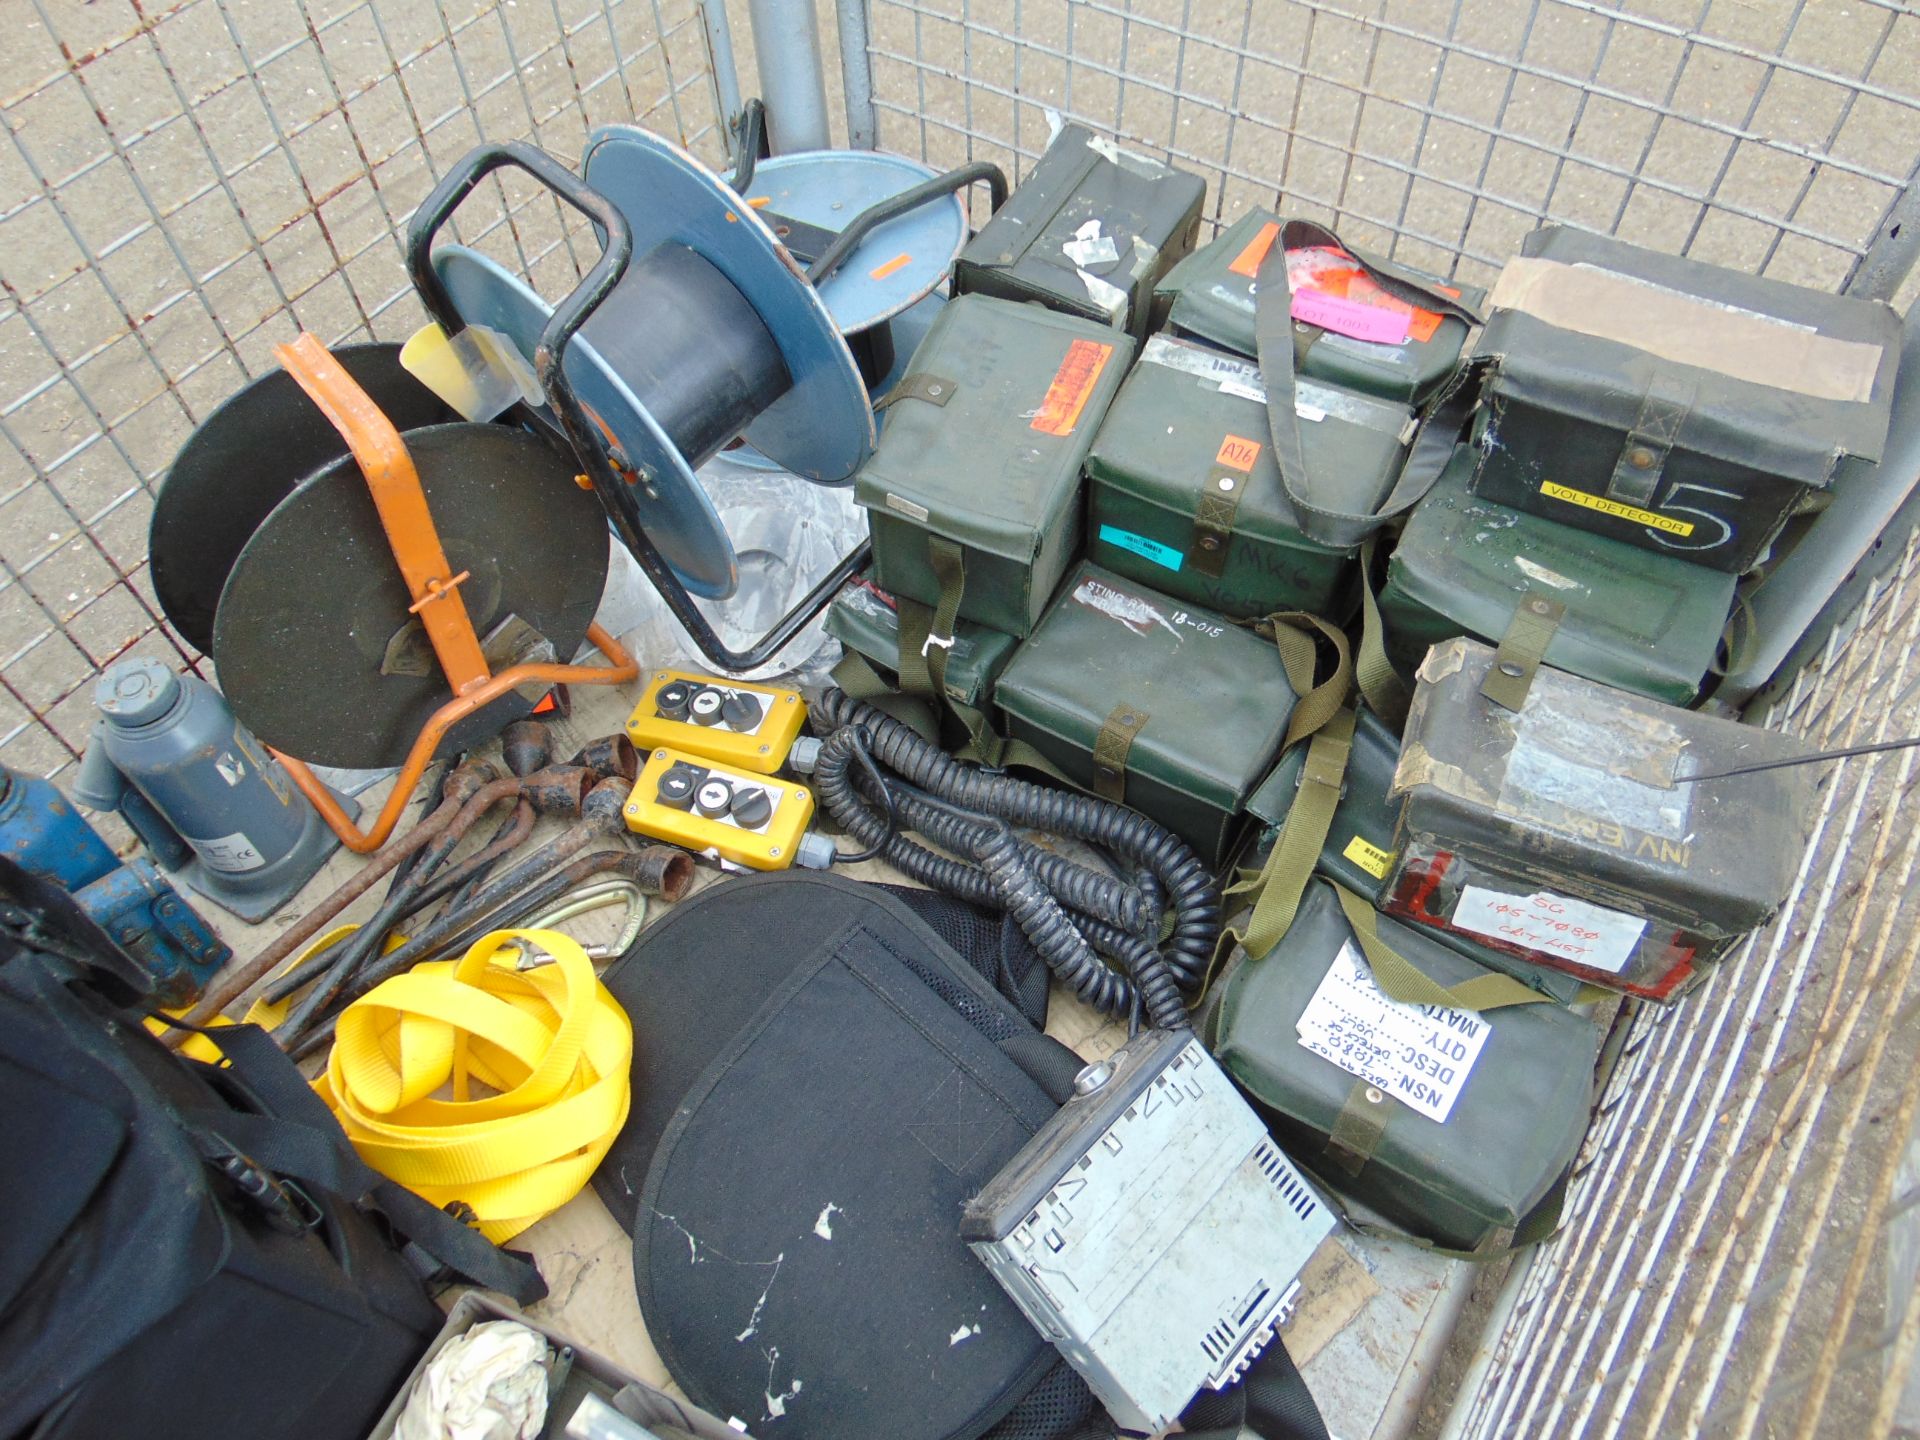 1x Stillage of Electrical Testers, Cable Reels, Jacks, Remote Controls etc - Image 2 of 7